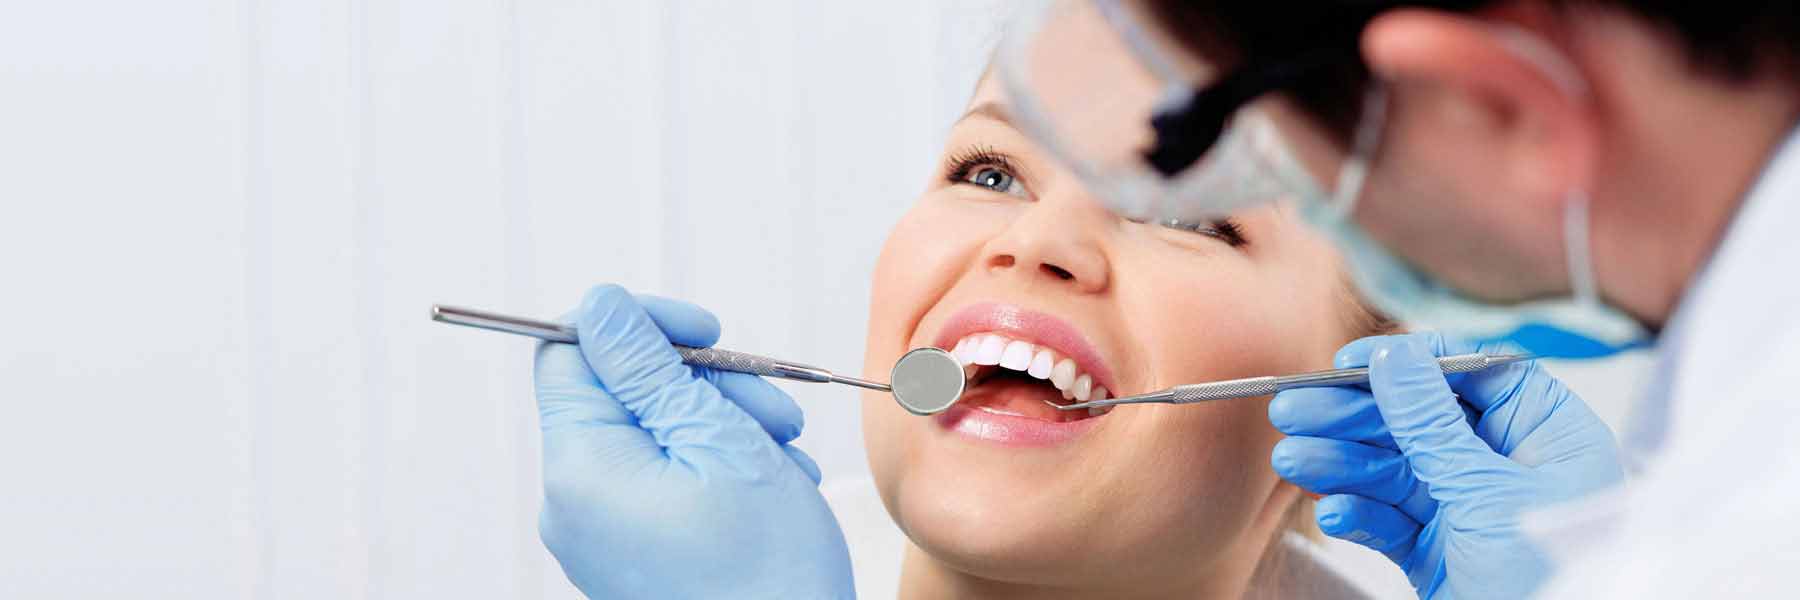 Dental Service in Aberglasslyn - Tooth N Care